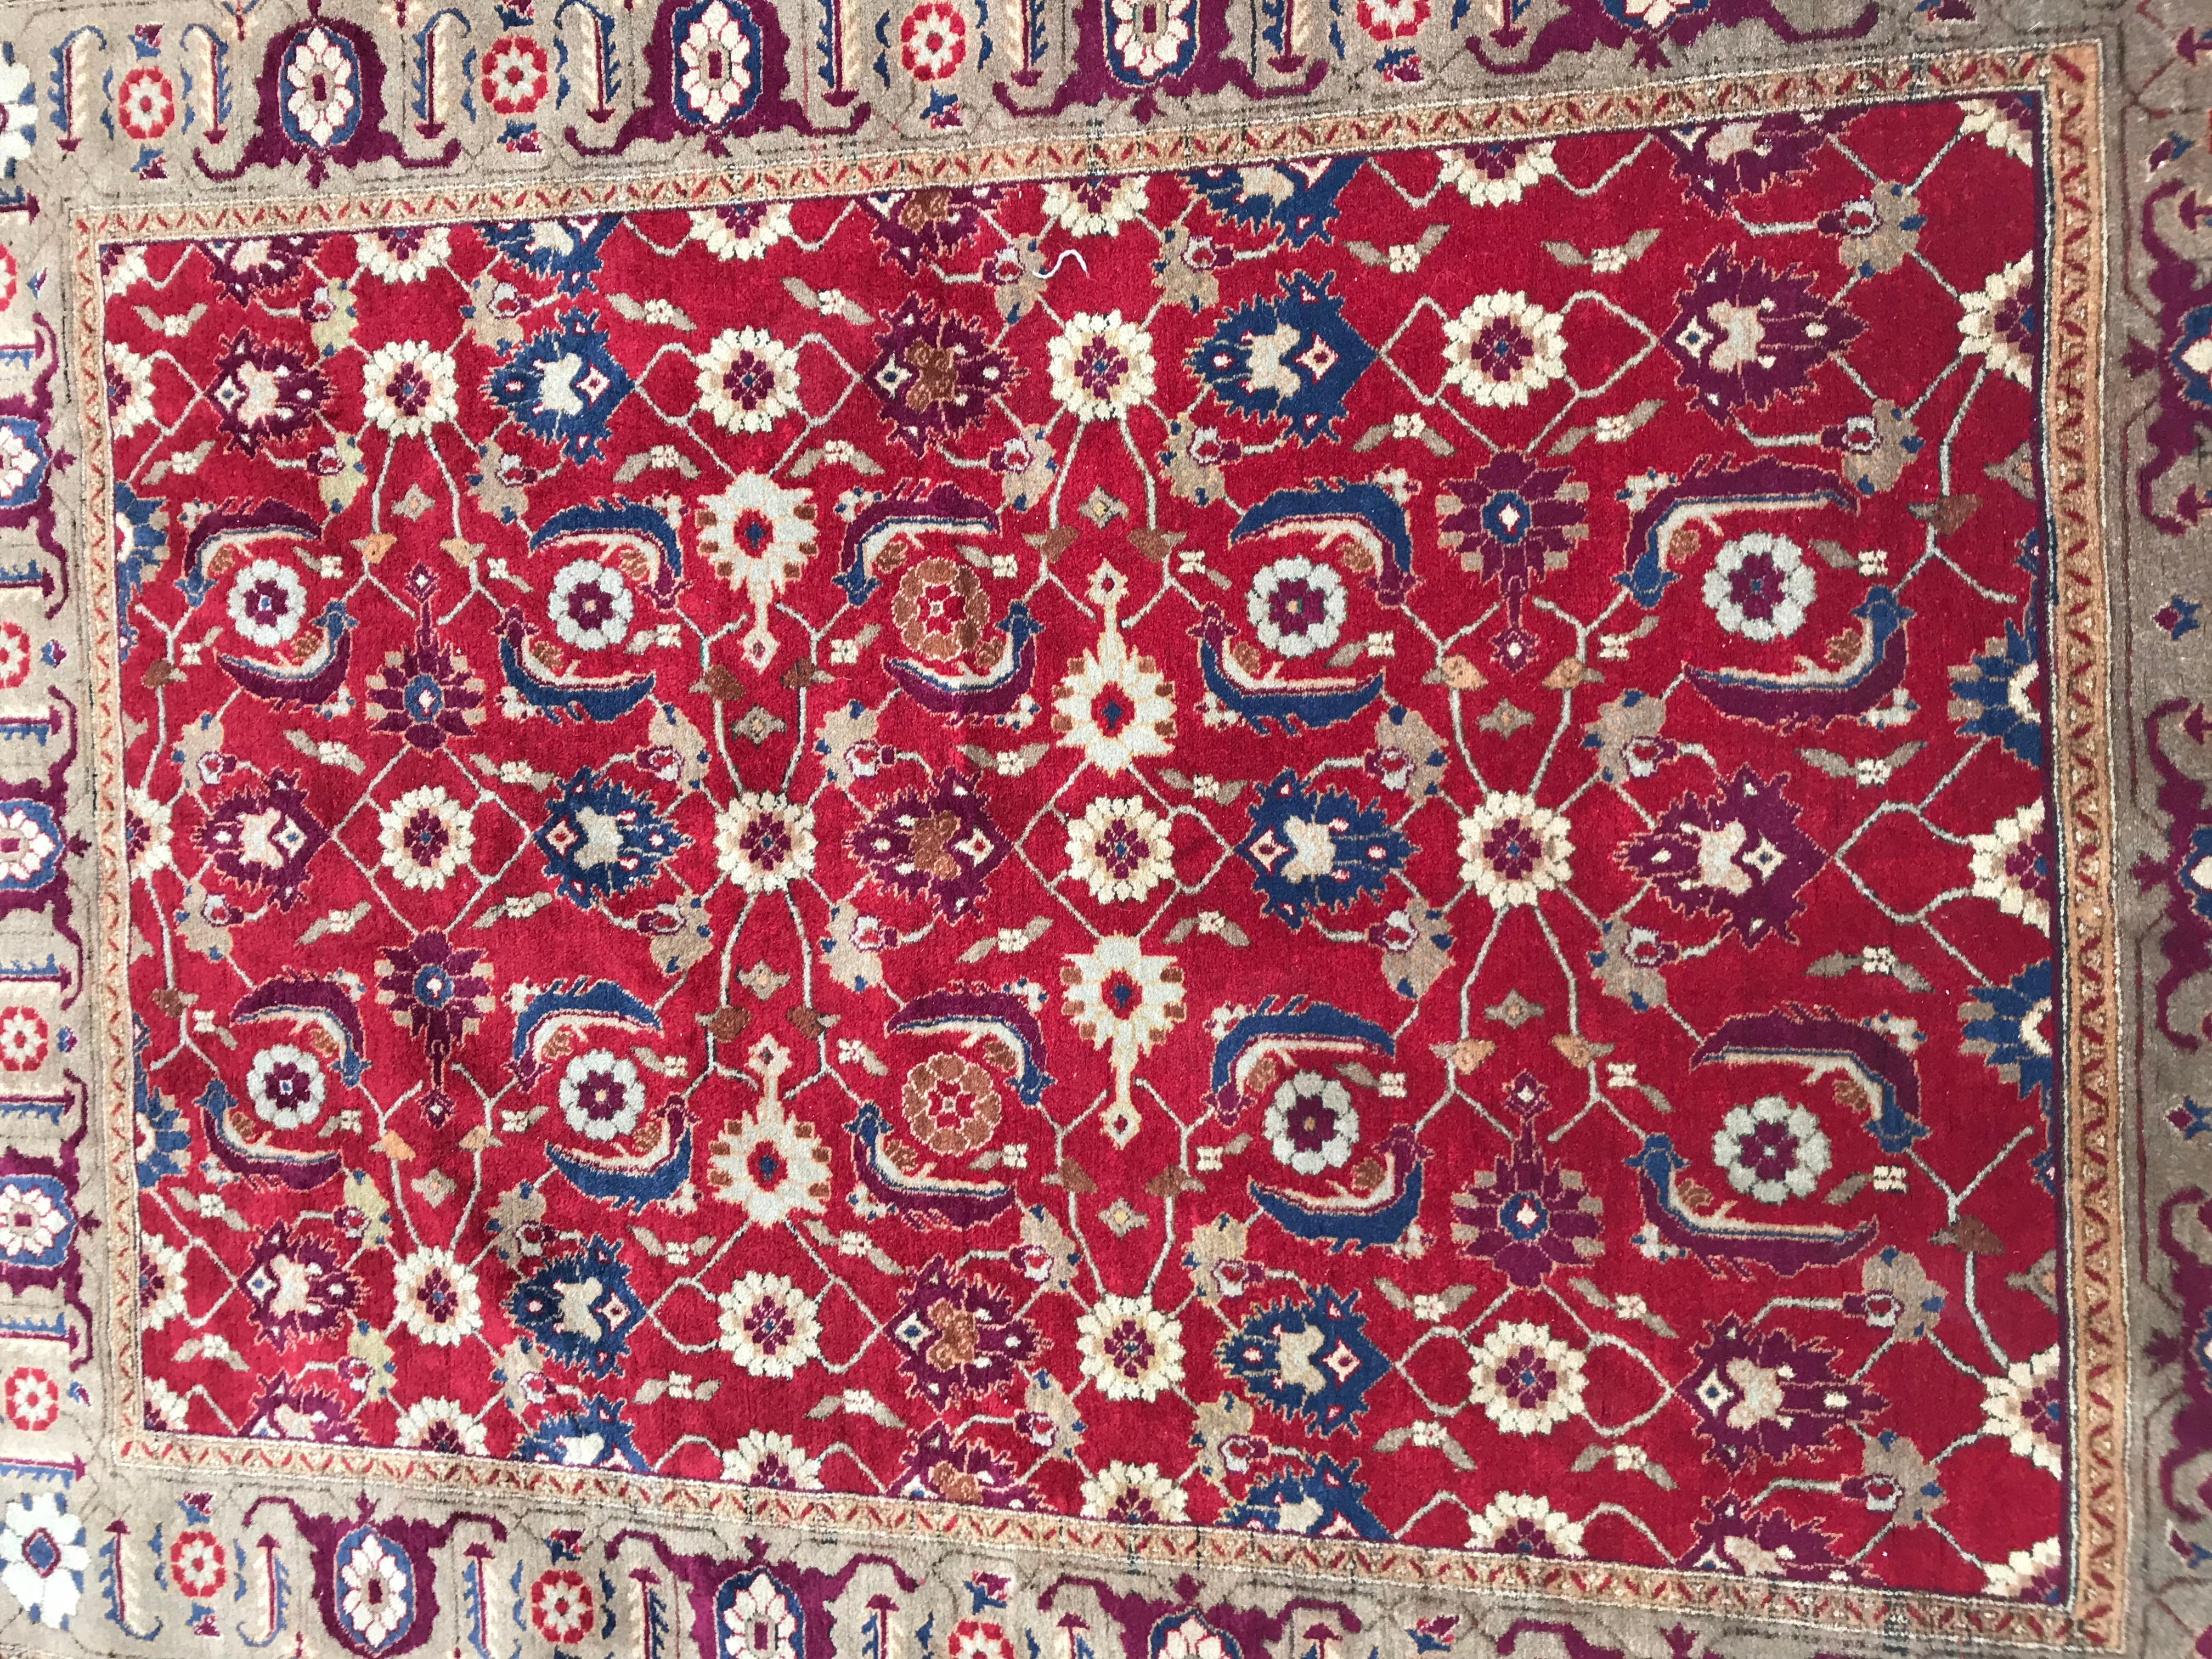 Very beautiful vintage rug from ex URSS, Karabagh region, very fine quality and beautiful colors and design in excellent conditions, entirely and finely hand knotted with wool velvet on cotton foundation.


✨✨✨
